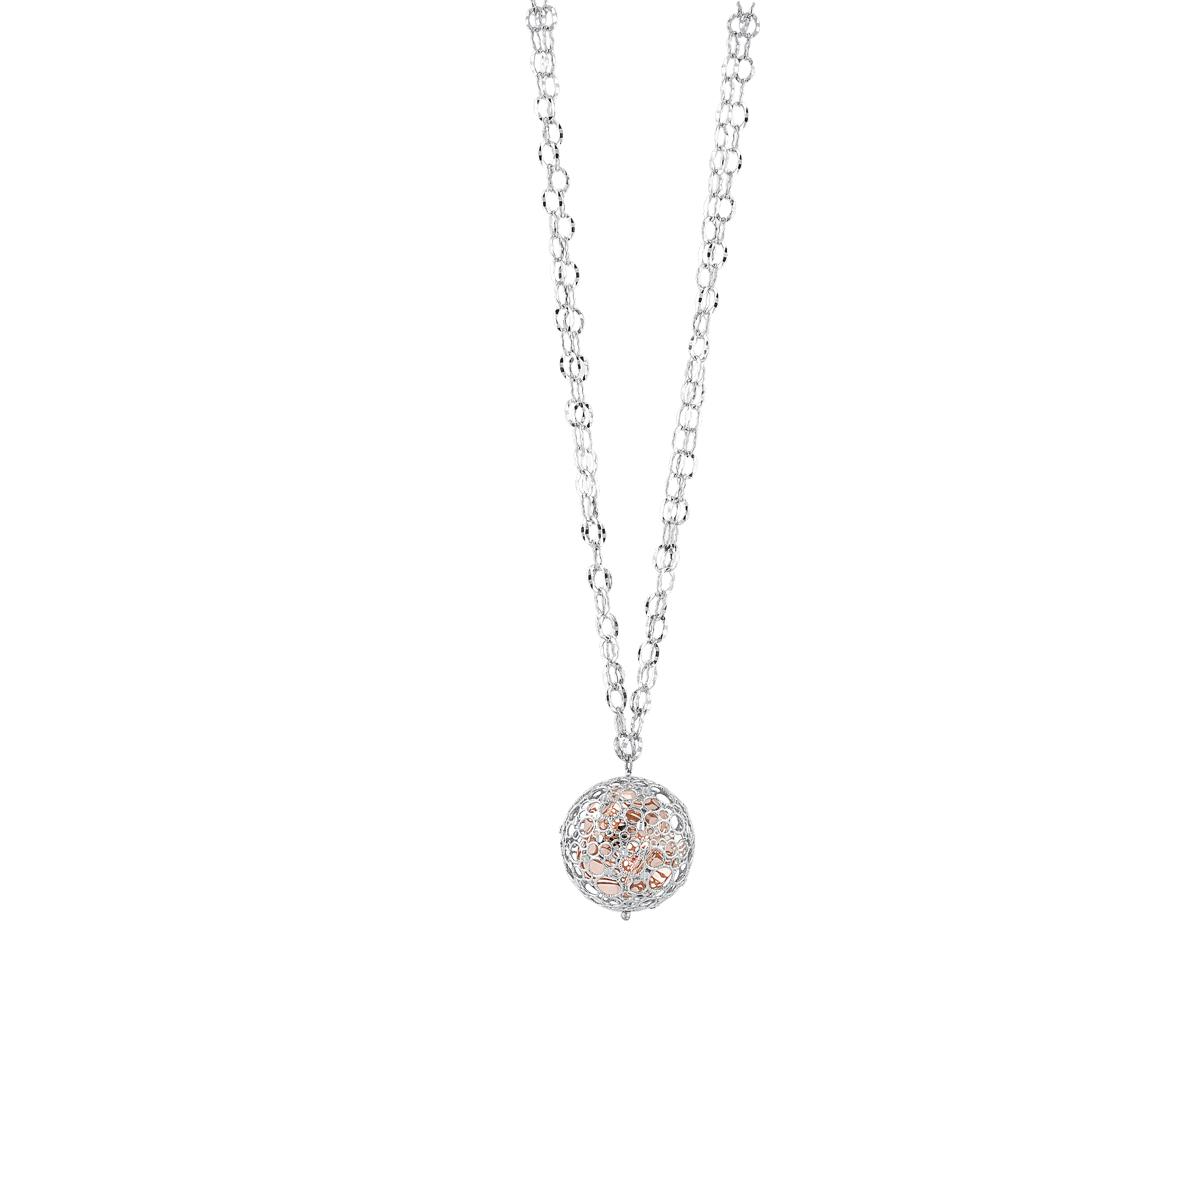 Chanel necklace in rhodium-plated and pink gold-plated 925 silver - ZCL957-LH